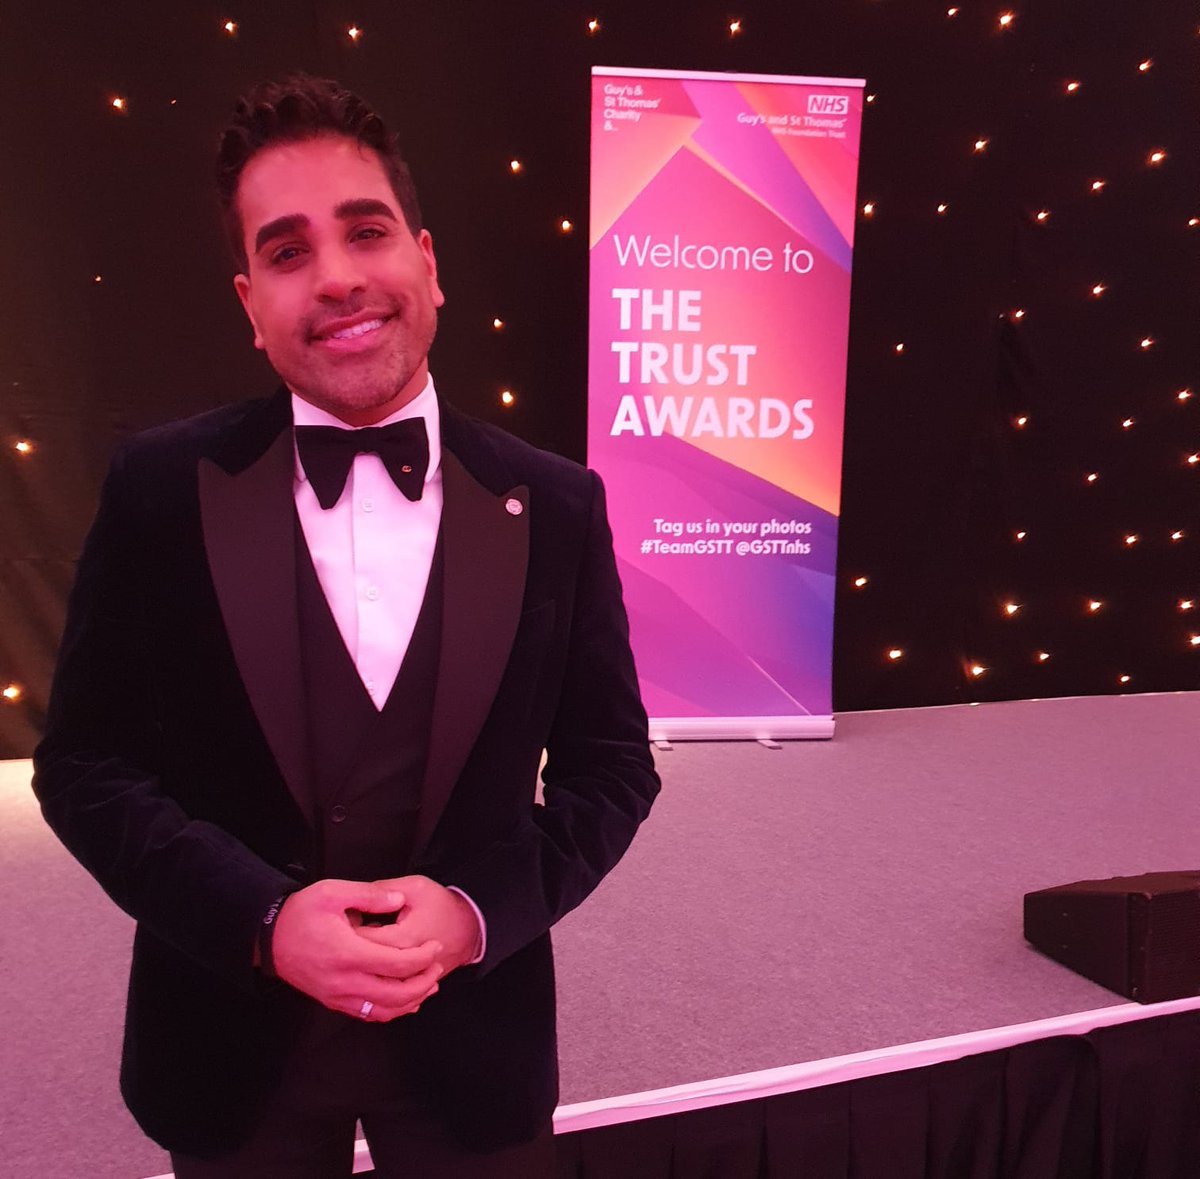 We are very excited to announce that our very own children’s emergency department consultant and celebrity TV doctor, Ranj Singh, is hosting the prestigious Trust Awards tonight. Dressed to impress as always Dr Ranj! #TeamGSTT